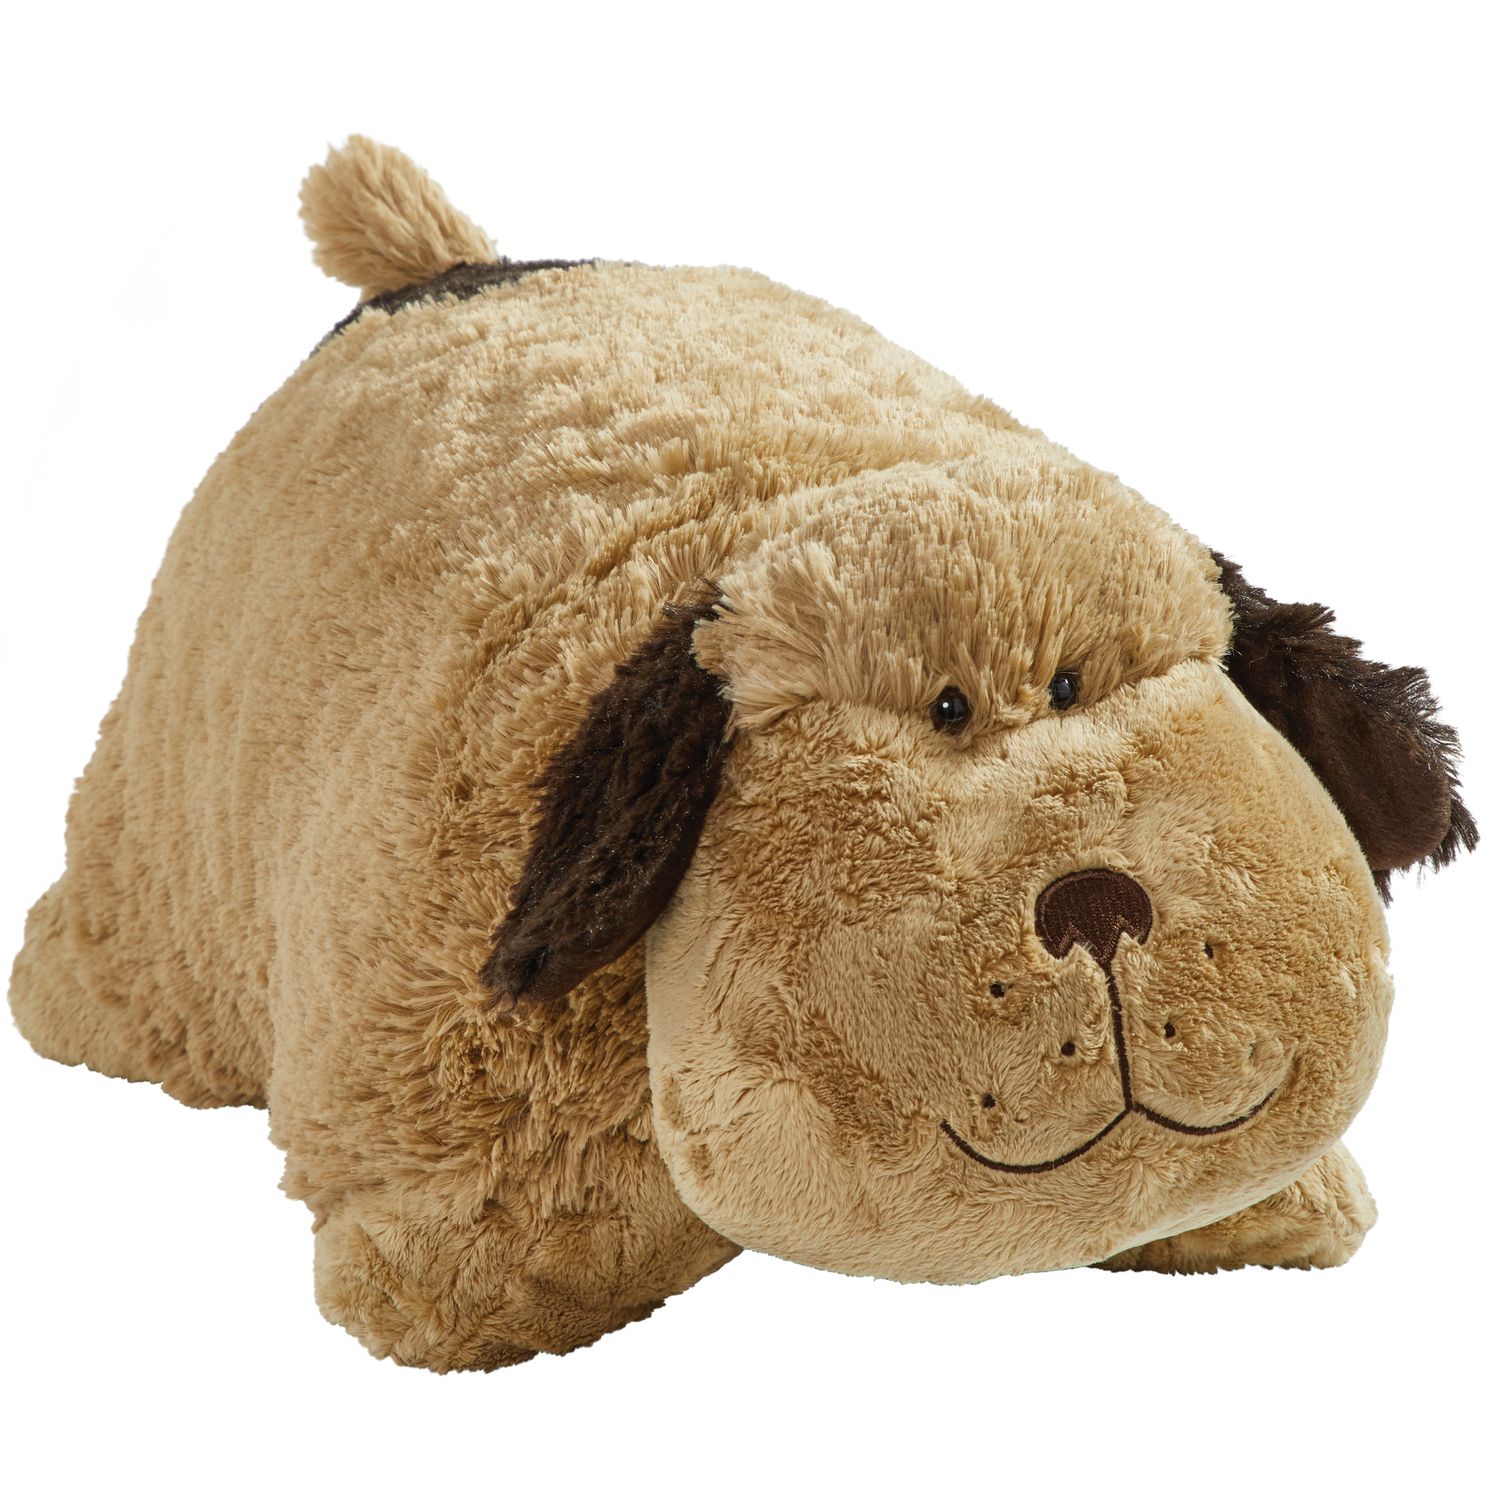 where to buy pillow pets near me